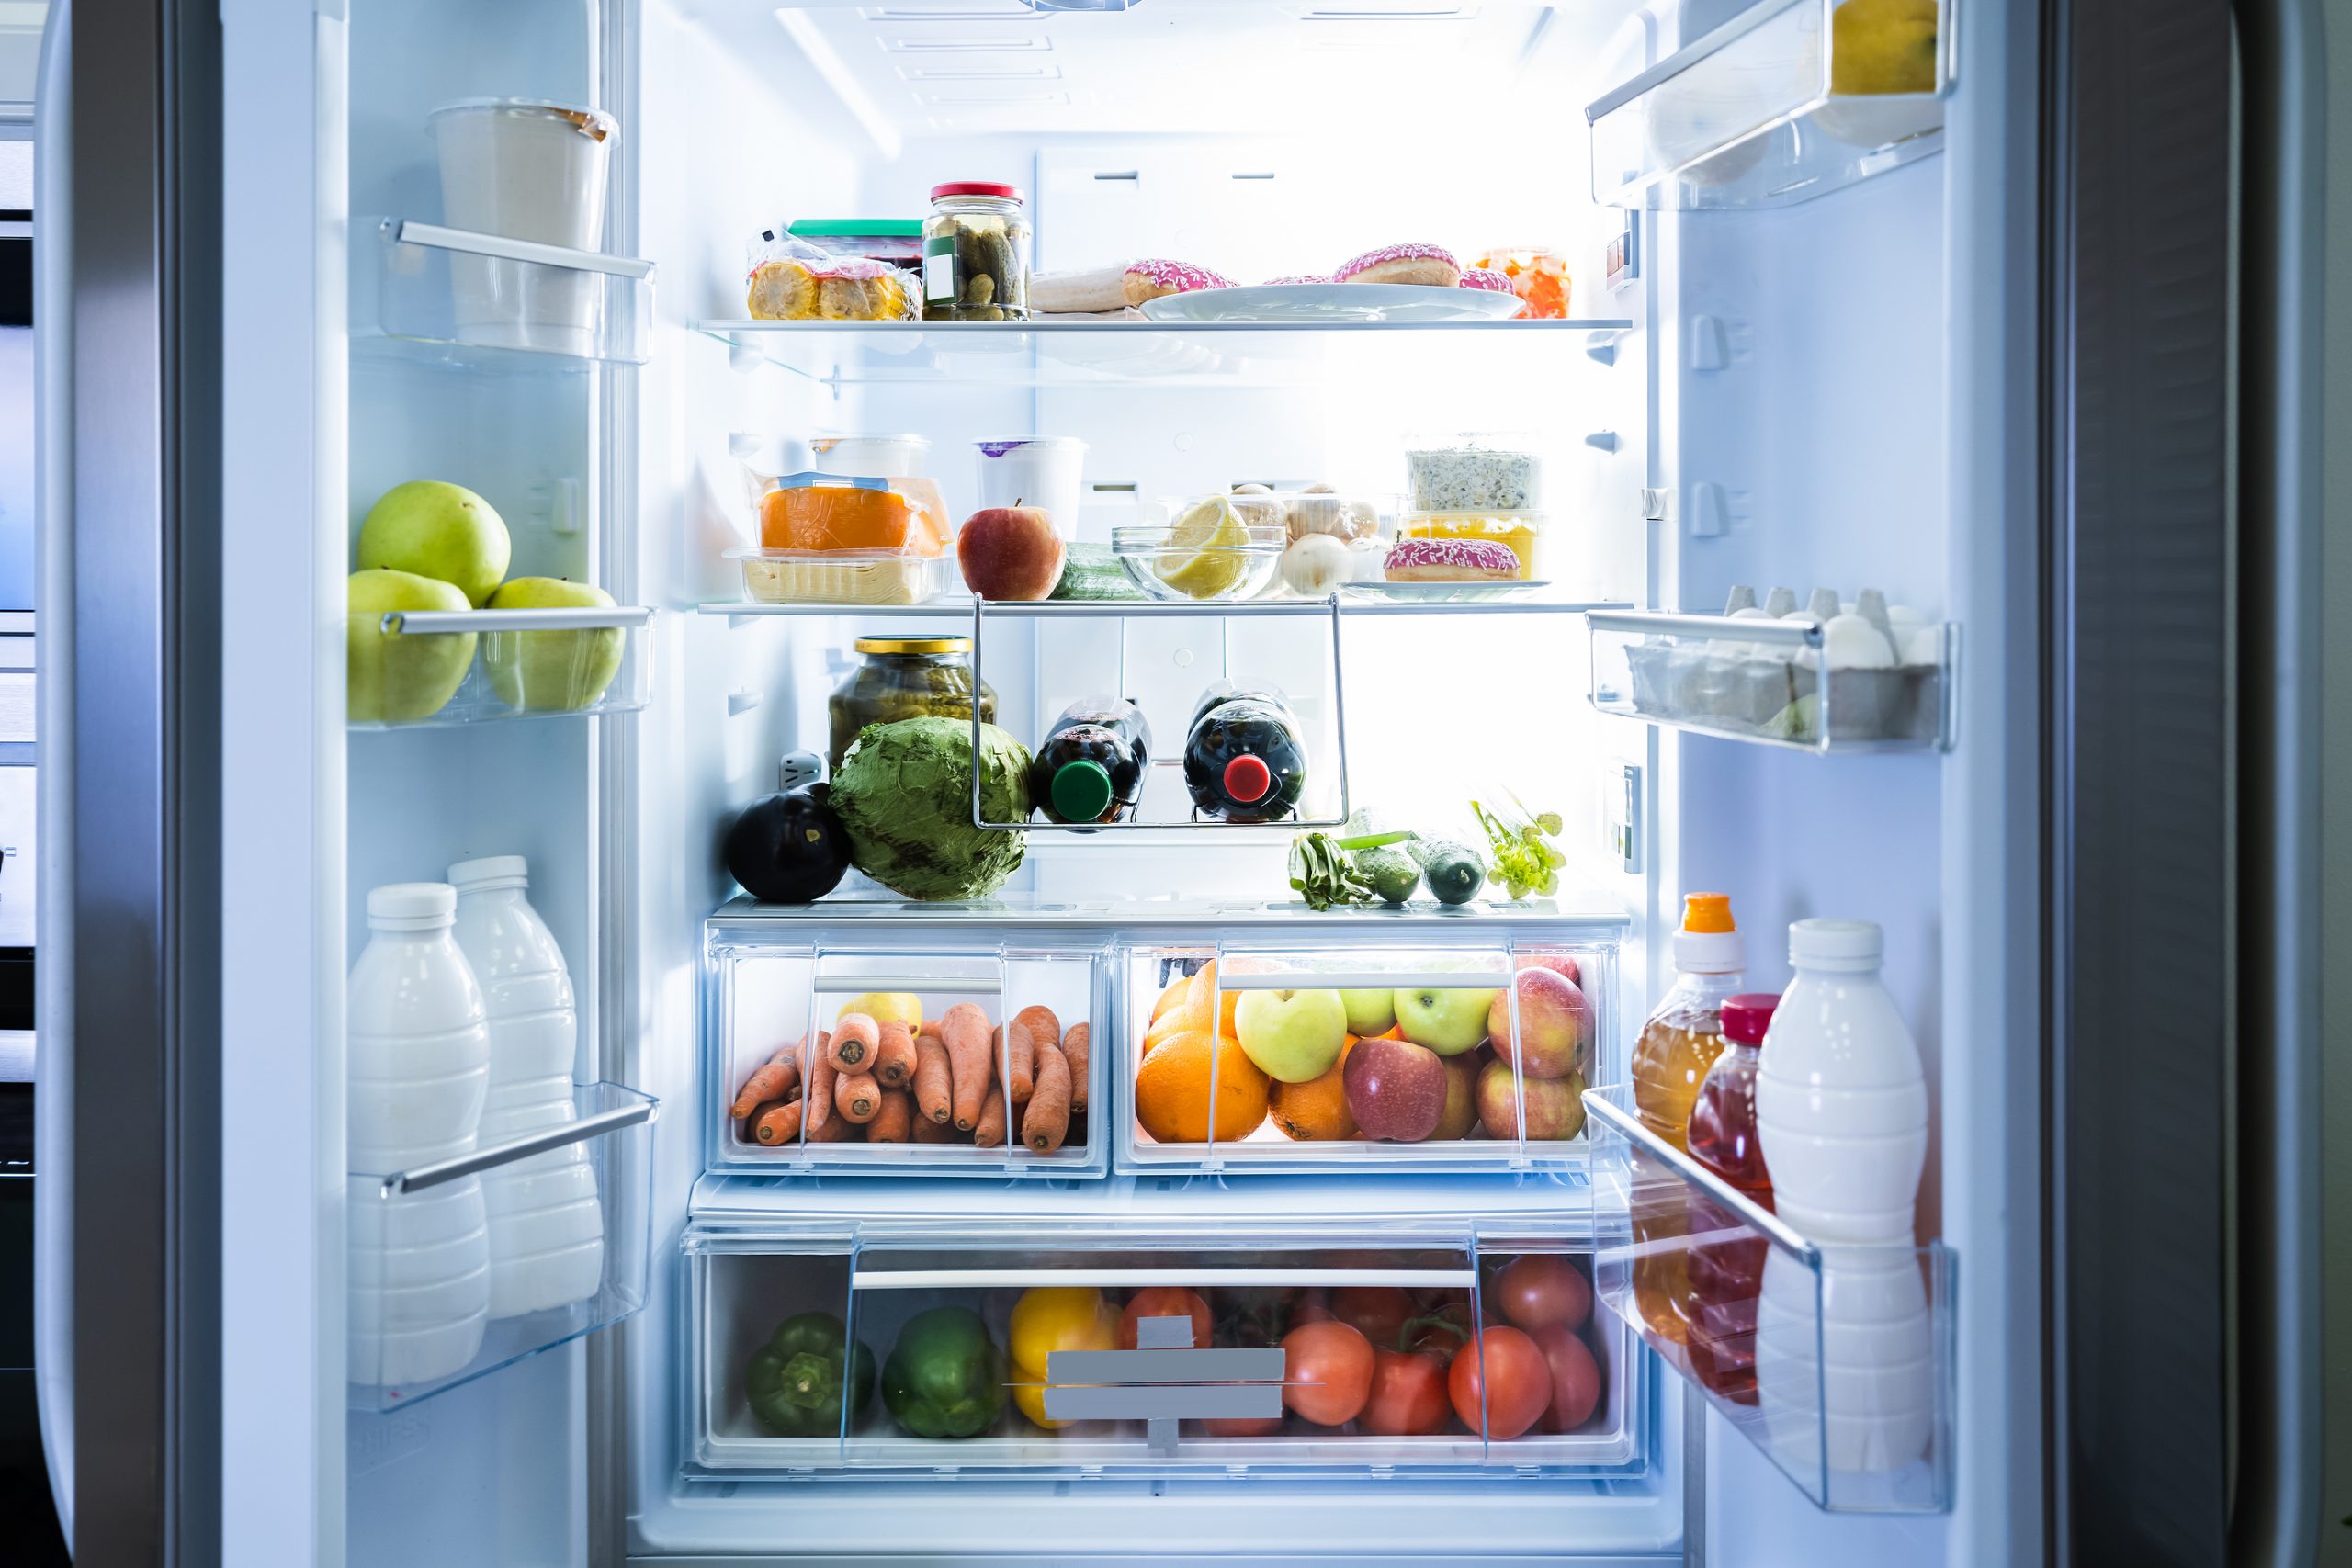 How to Choose an Outdoor Refrigerator - Wilshire Refrigeration & Appliance